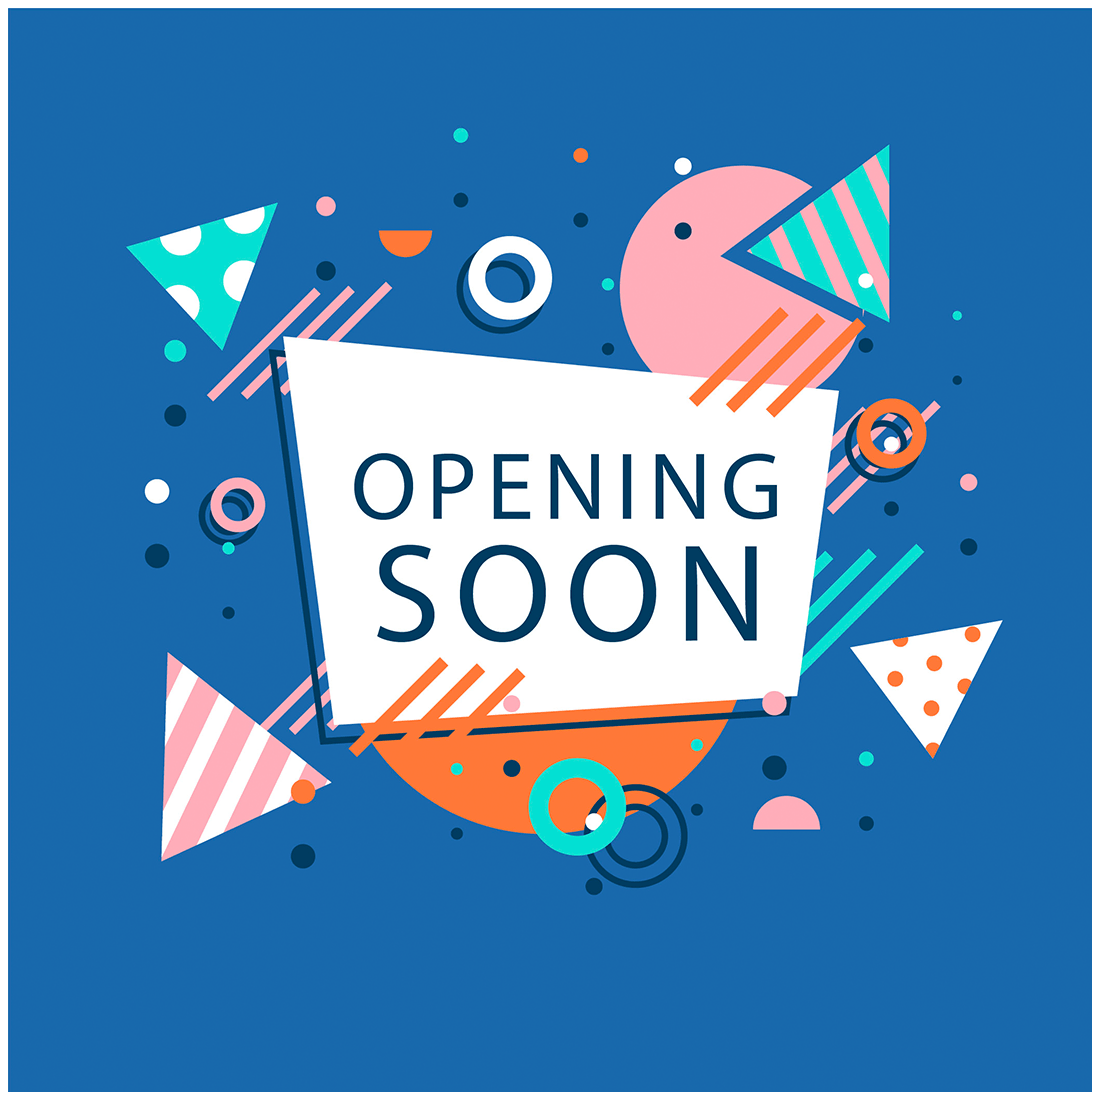 OPENING SOON ILLUSTRATION preview image.